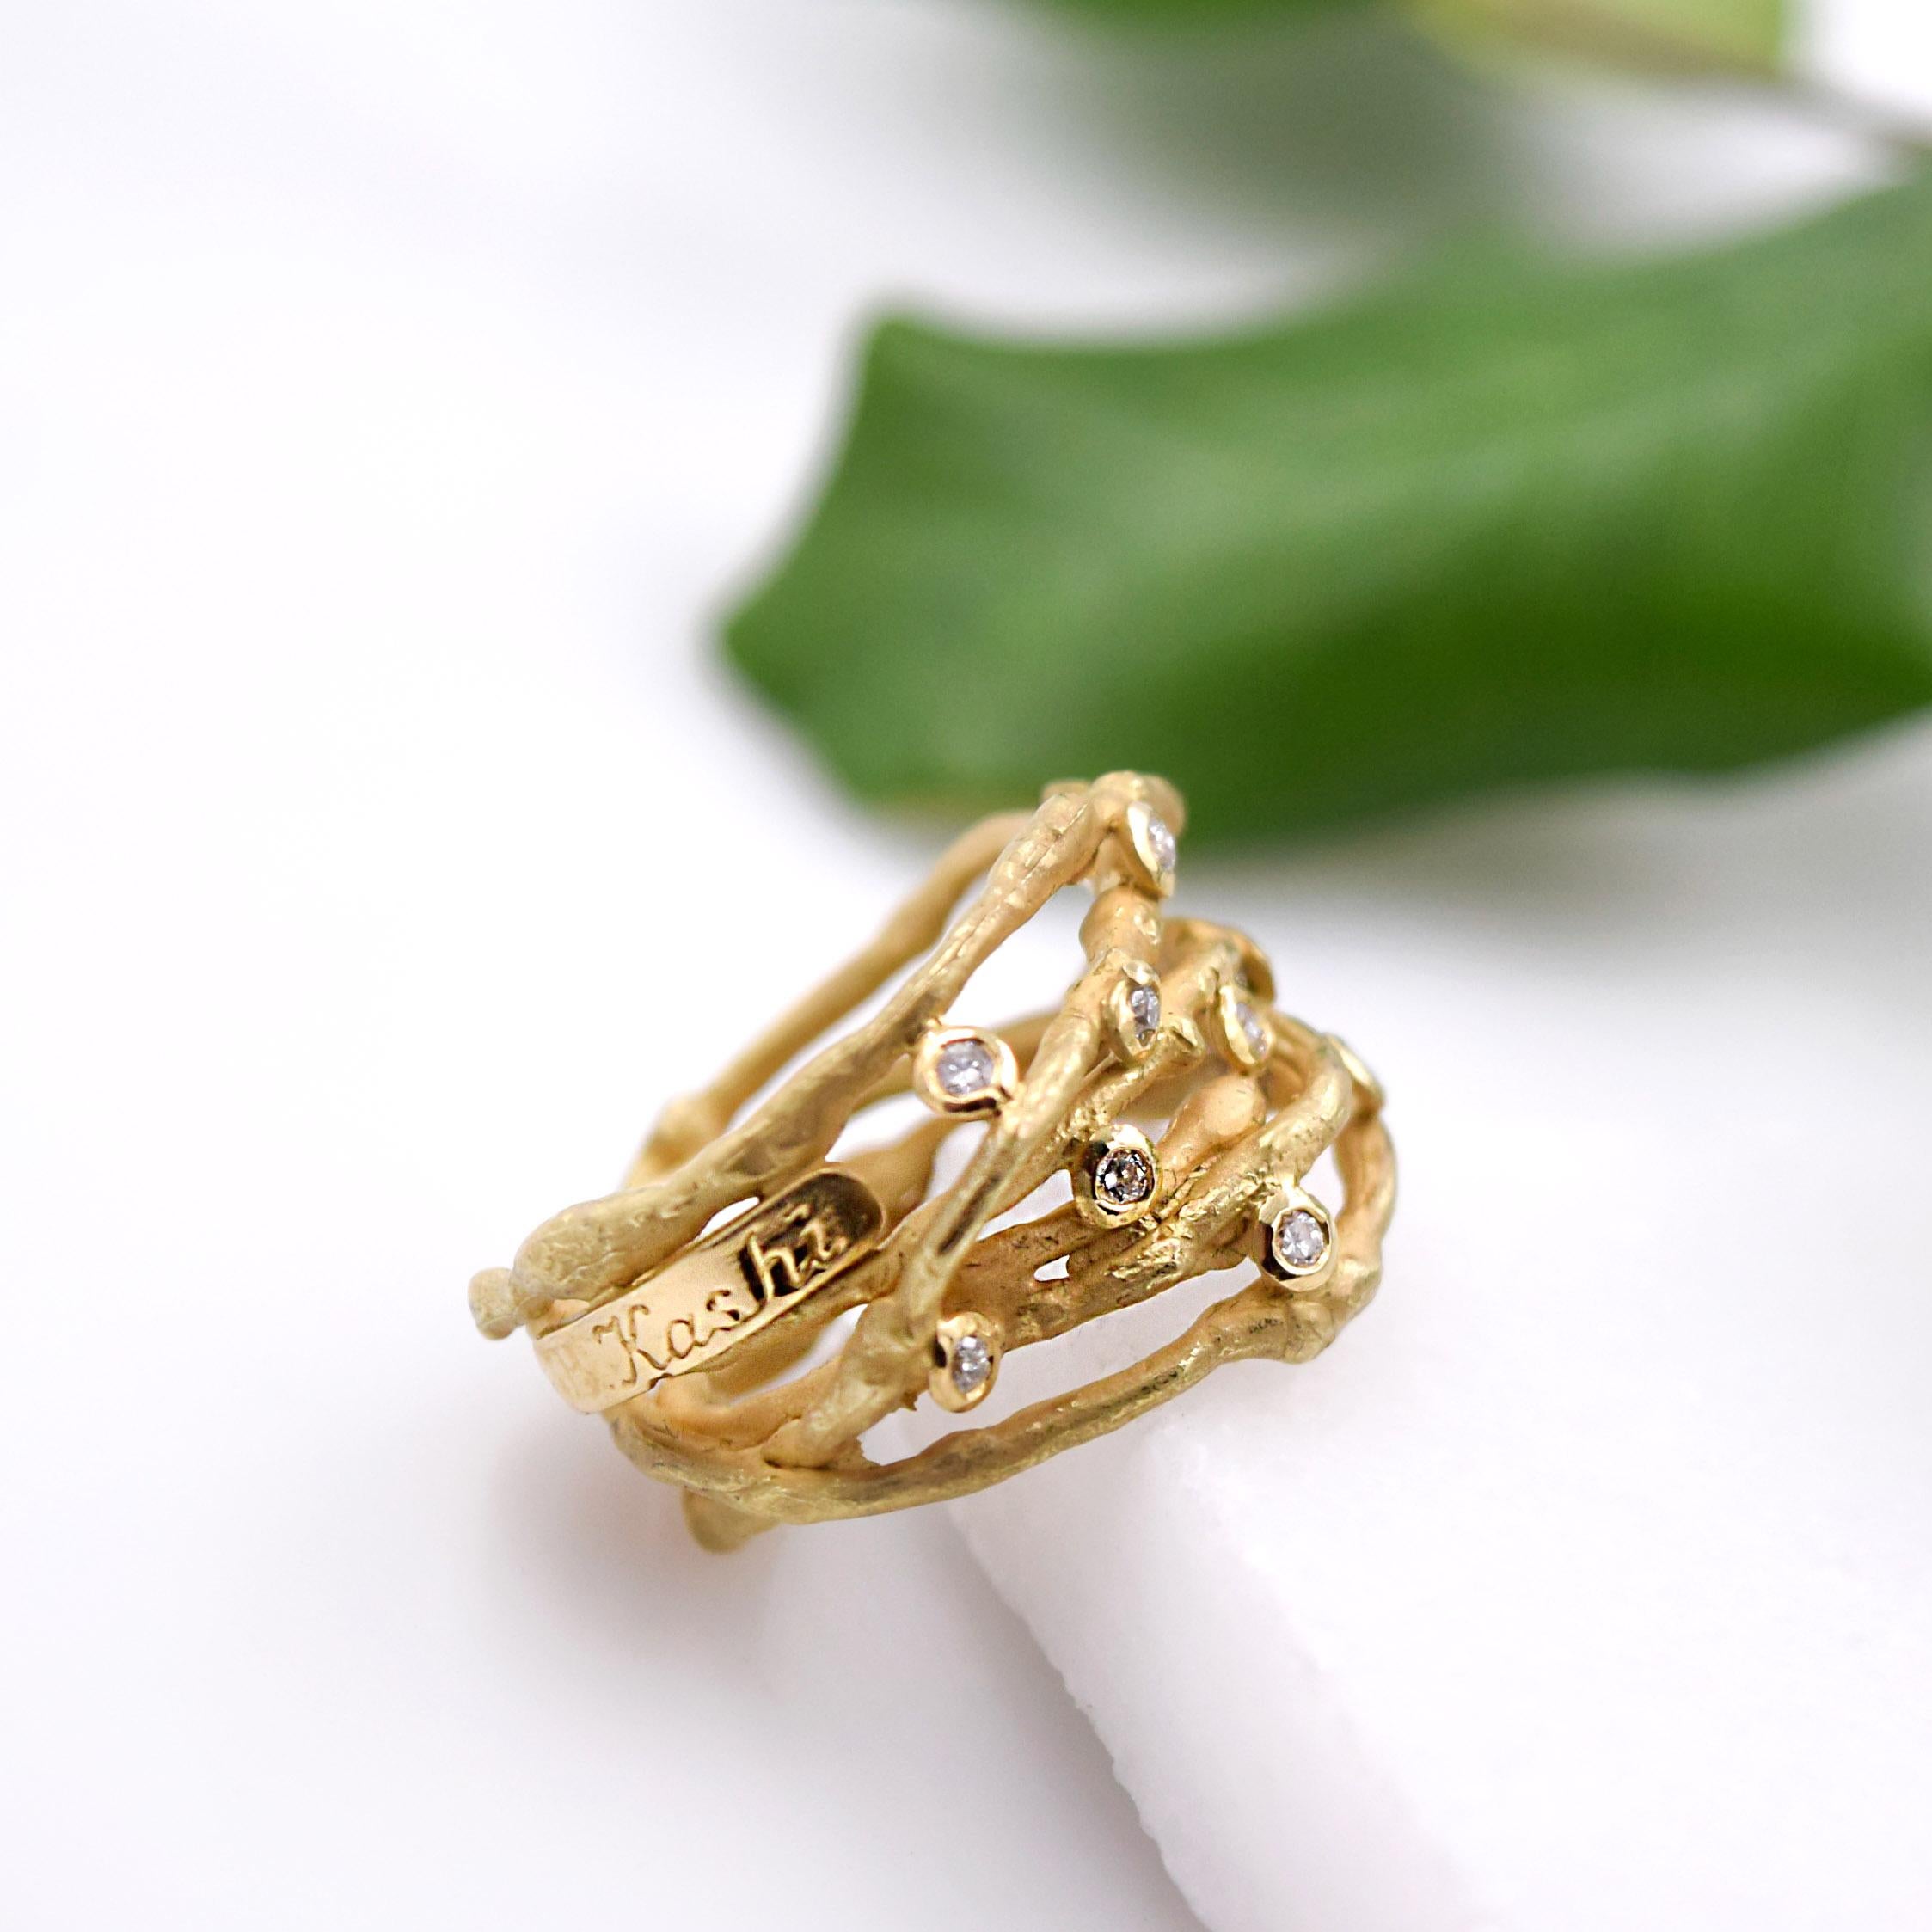 Boaz Kashi 0.22 Carat Diamond Wire Ring in 18 Karat Matte Yellow Gold In New Condition For Sale In Mill Valley, CA